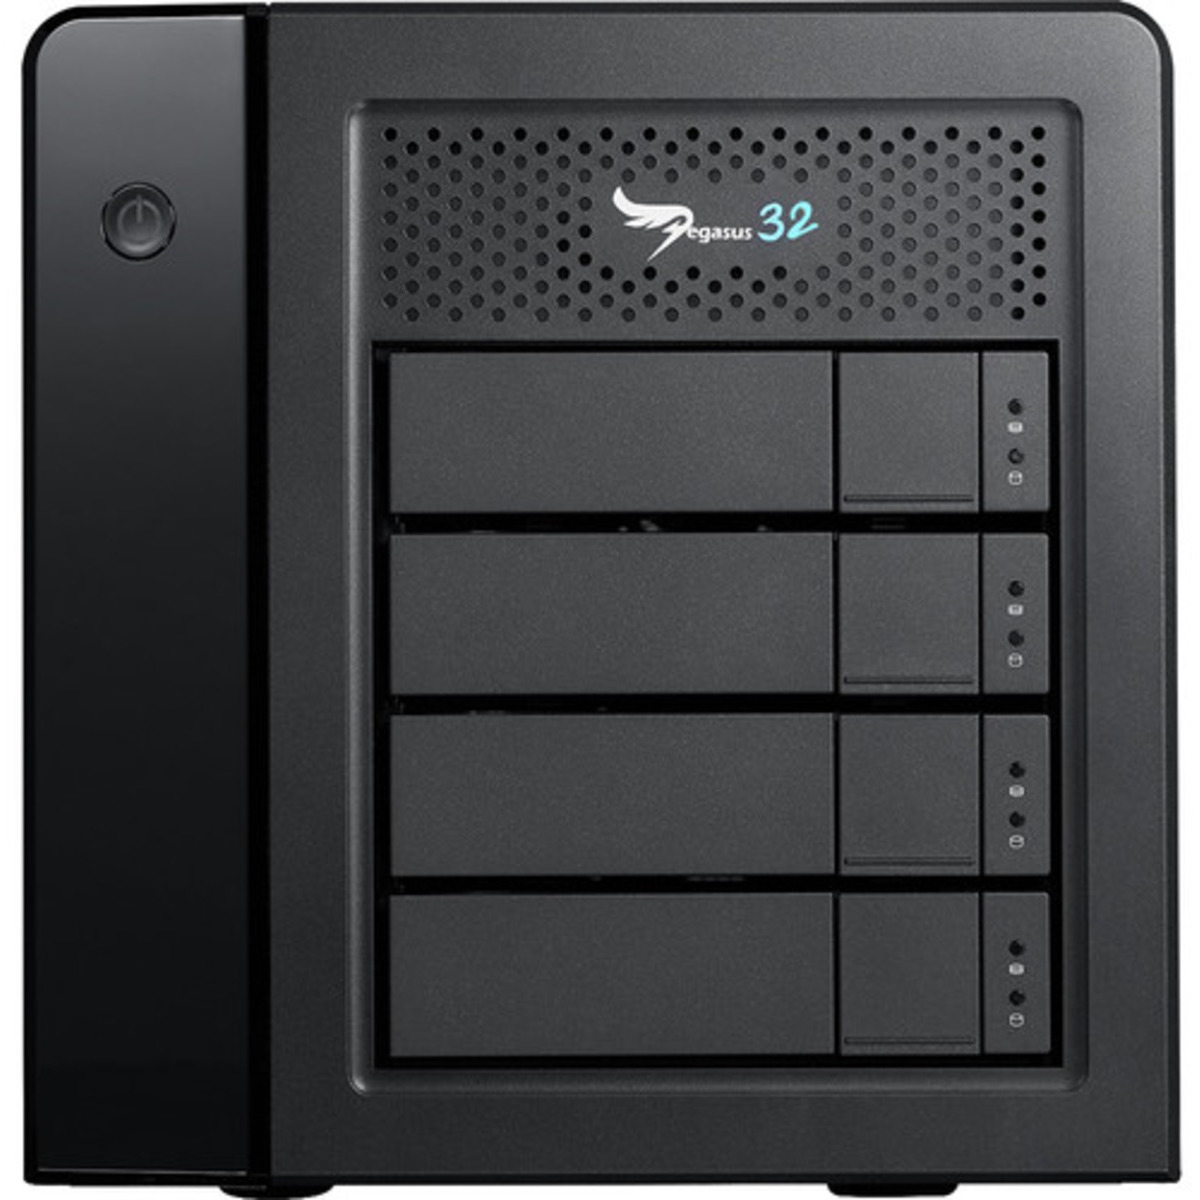 Promise Technology Pegasus32 R4 Thunderbolt 3 32tb 4-Bay Desktop Multimedia / Power User / Business DAS - Direct Attached Storage Device 4x8tb Seagate EXOS 7E10 ST8000NM017B 3.5 7200rpm SATA 6Gb/s HDD ENTERPRISE Class Drives Installed - Burn-In Tested Pegasus32 R4 Thunderbolt 3